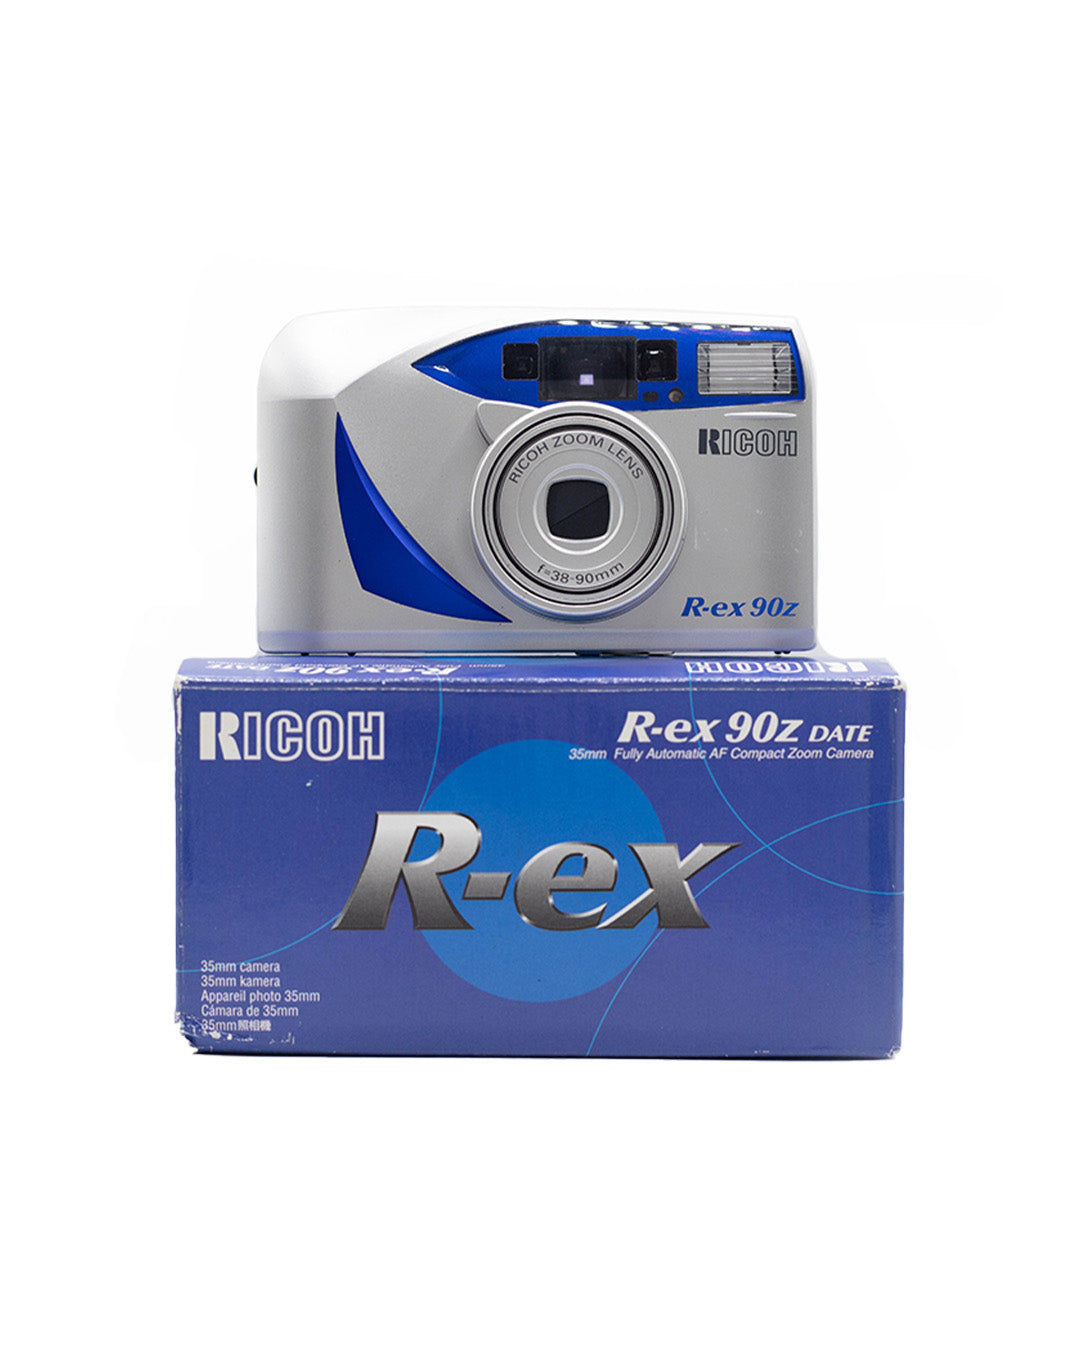 *NEW Ricoh R-ex 90z Date 35mm Point & Shoot Camera with 38-90mm with f/4.9-10.9 lens